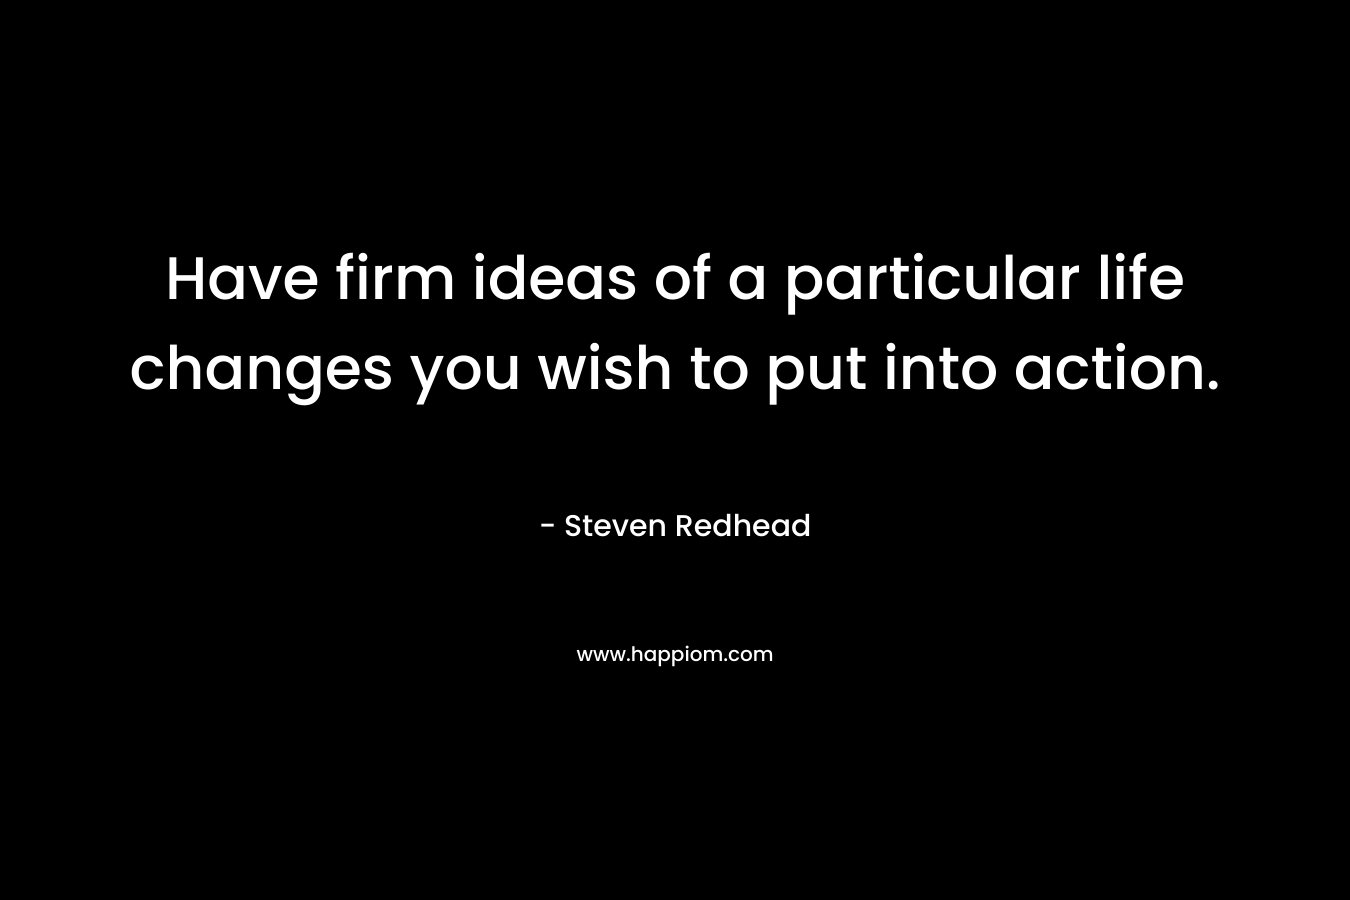 Have firm ideas of a particular life changes you wish to put into action.